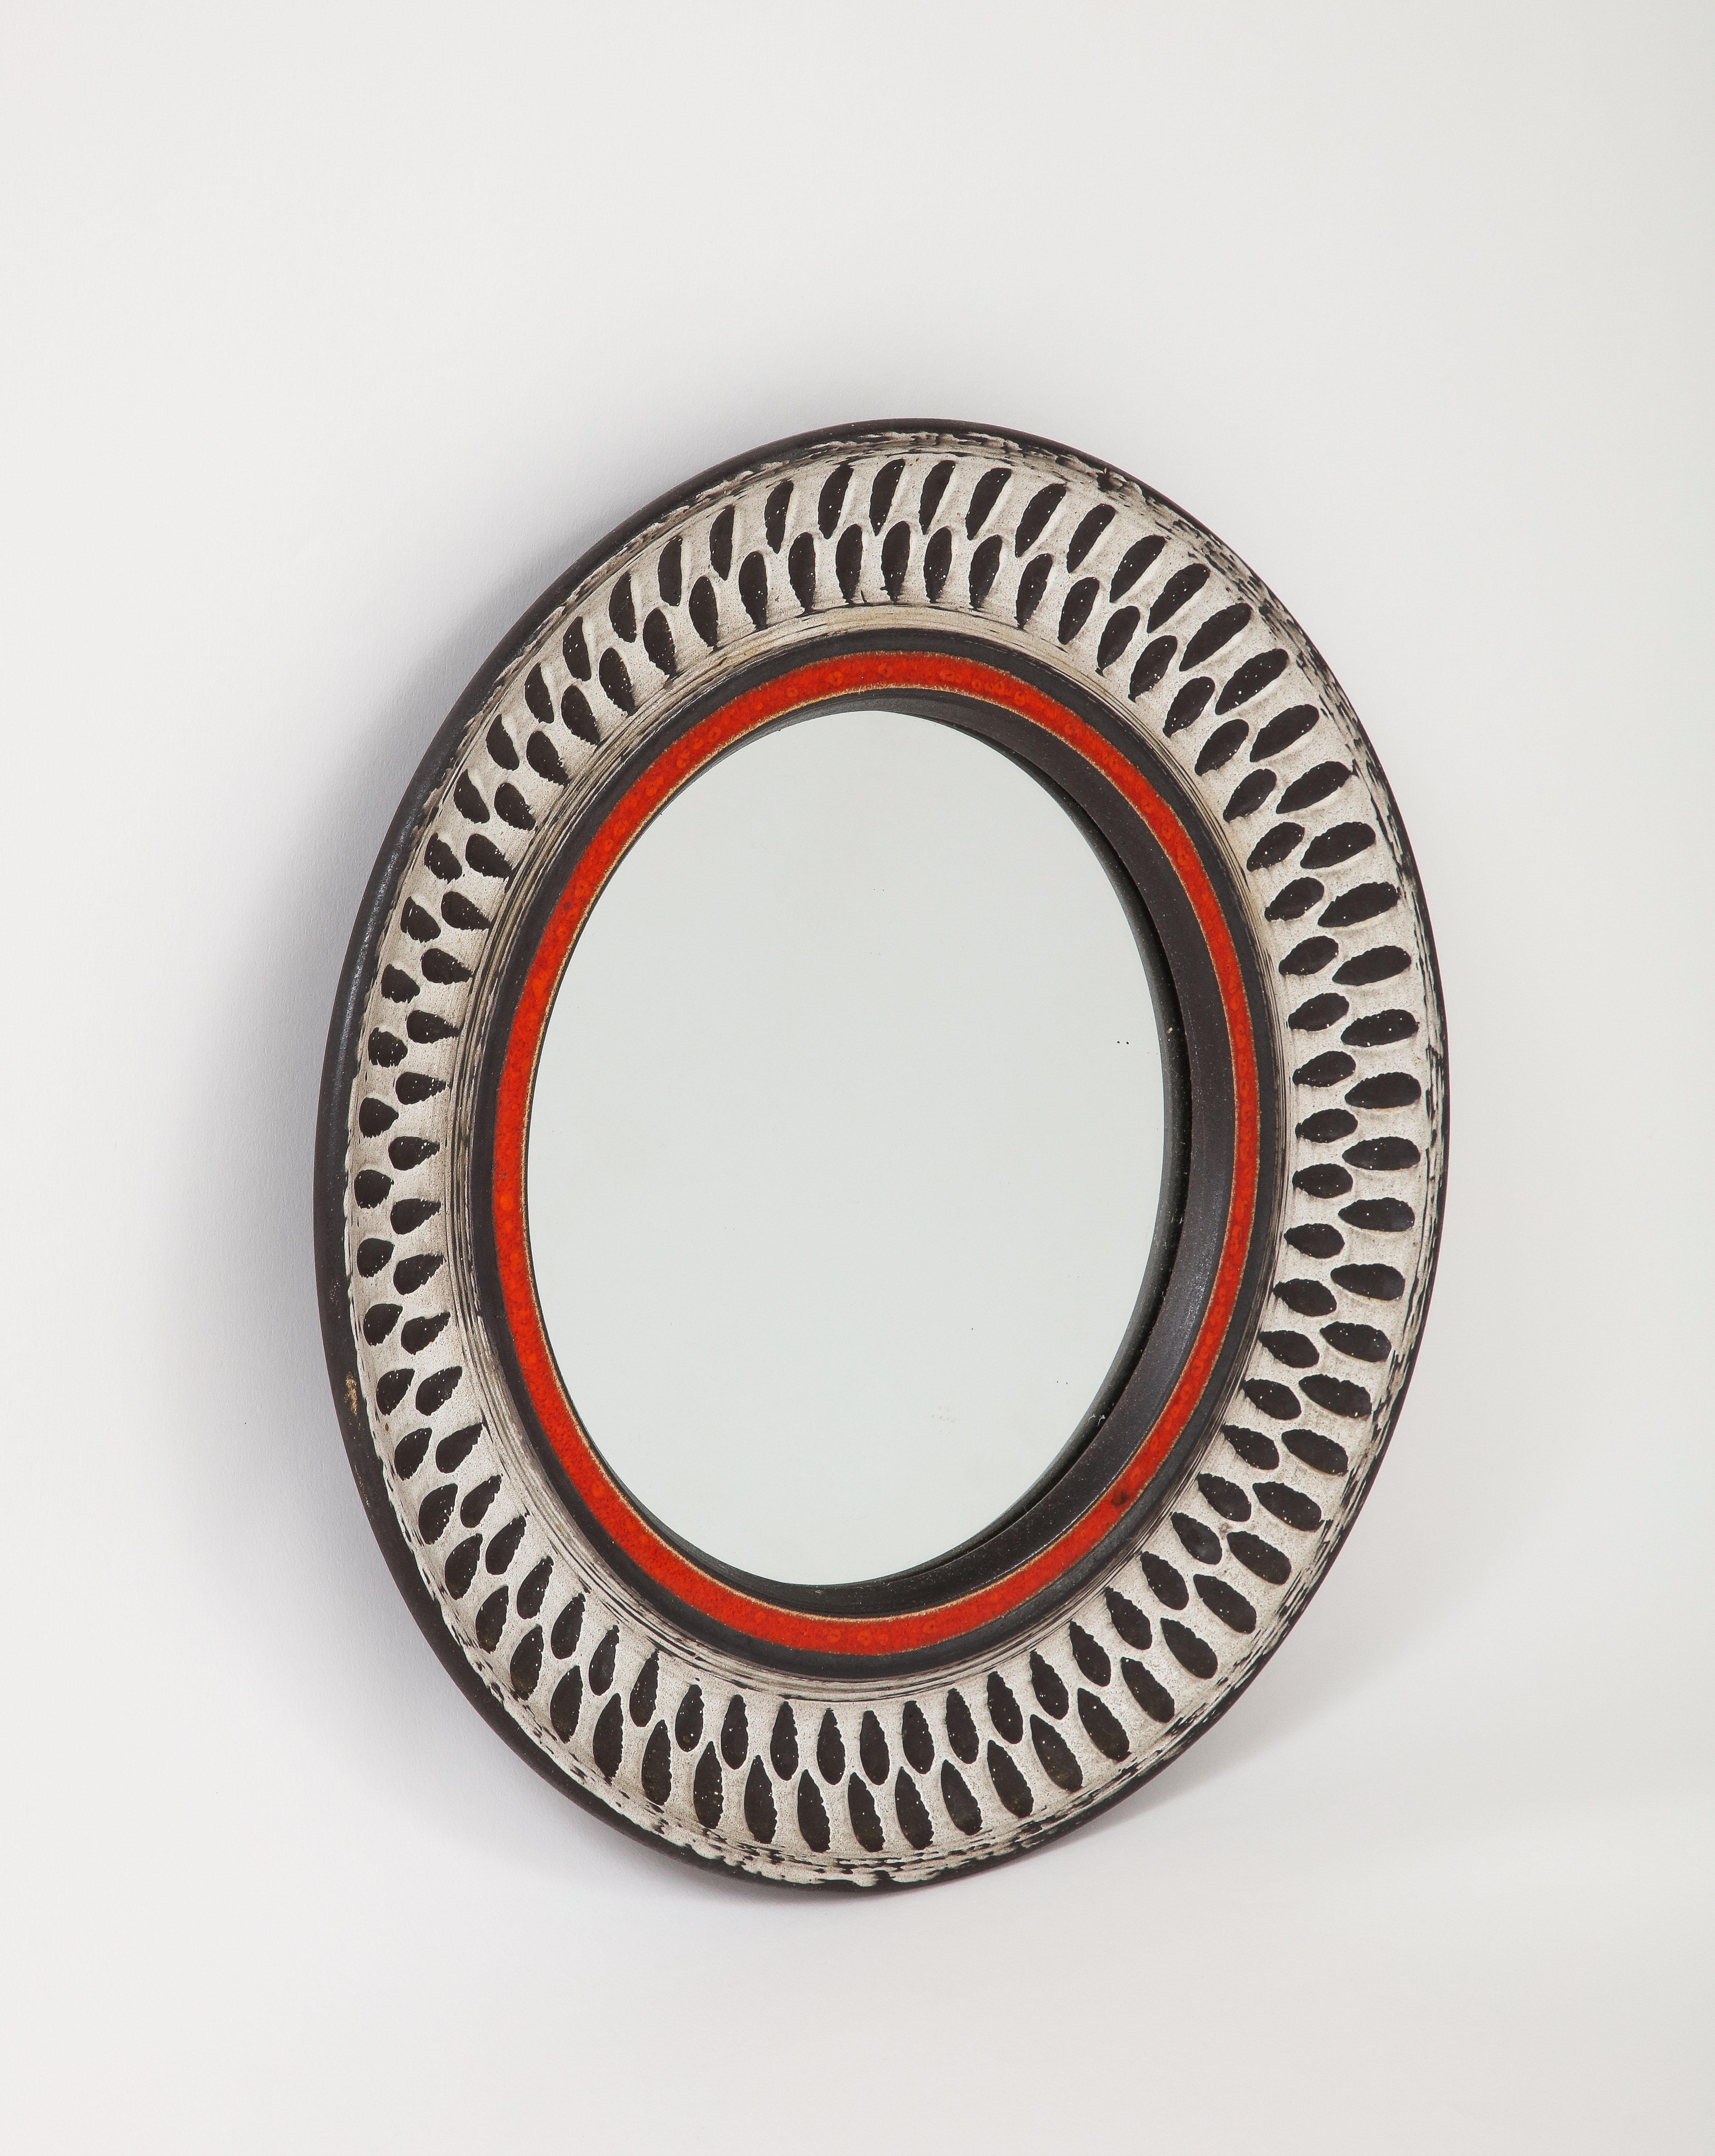 Elegant round shaped petite wall mirror. Possibly from Vallauris. Etched ceramic.
In good vintage condition.